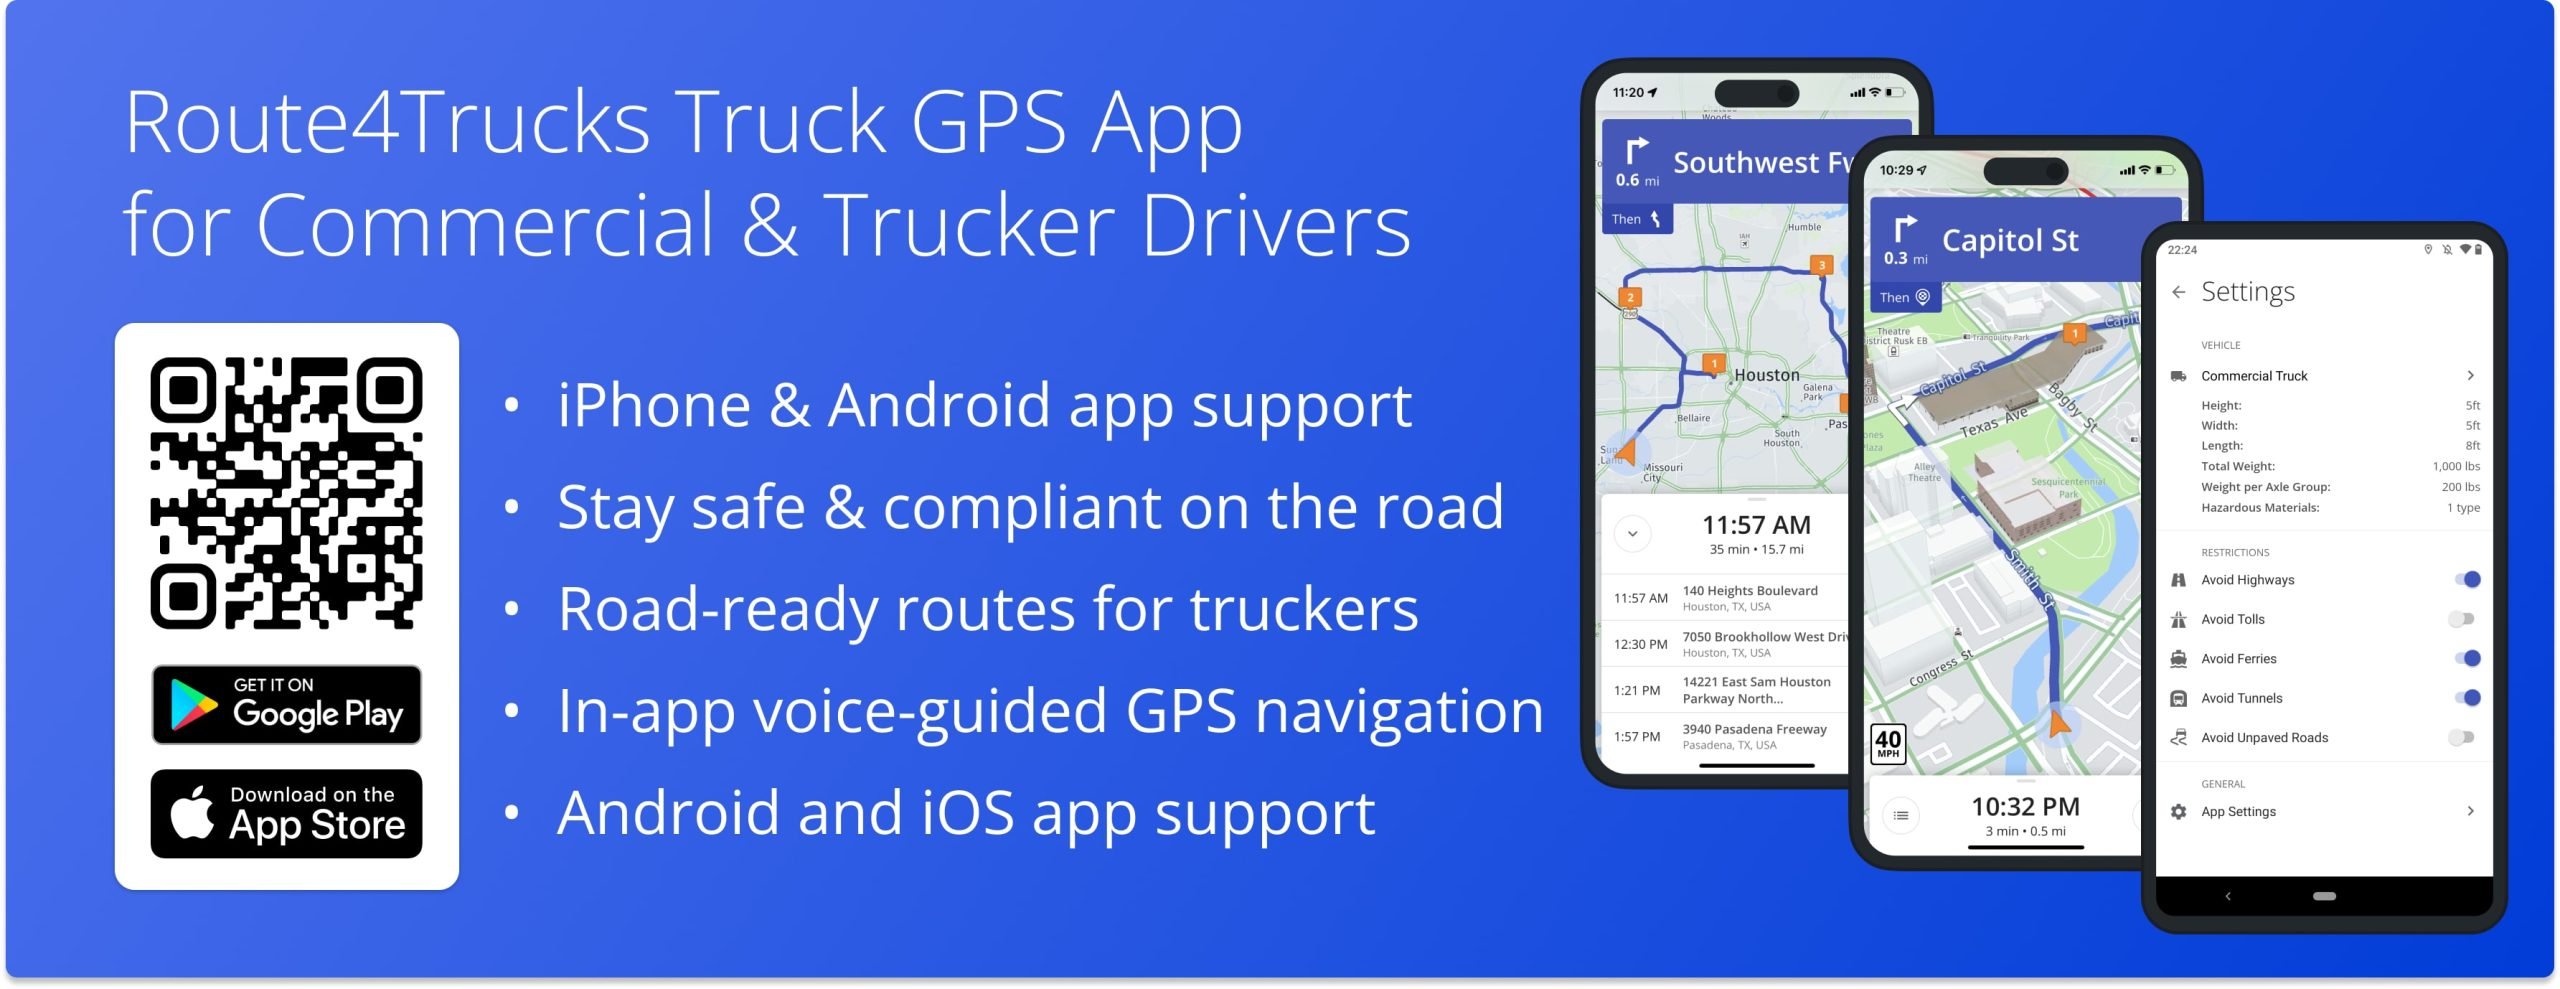 Download and install the best truck routing app Route4Trucks on iPhone, iPad, and Android phones and tablets.